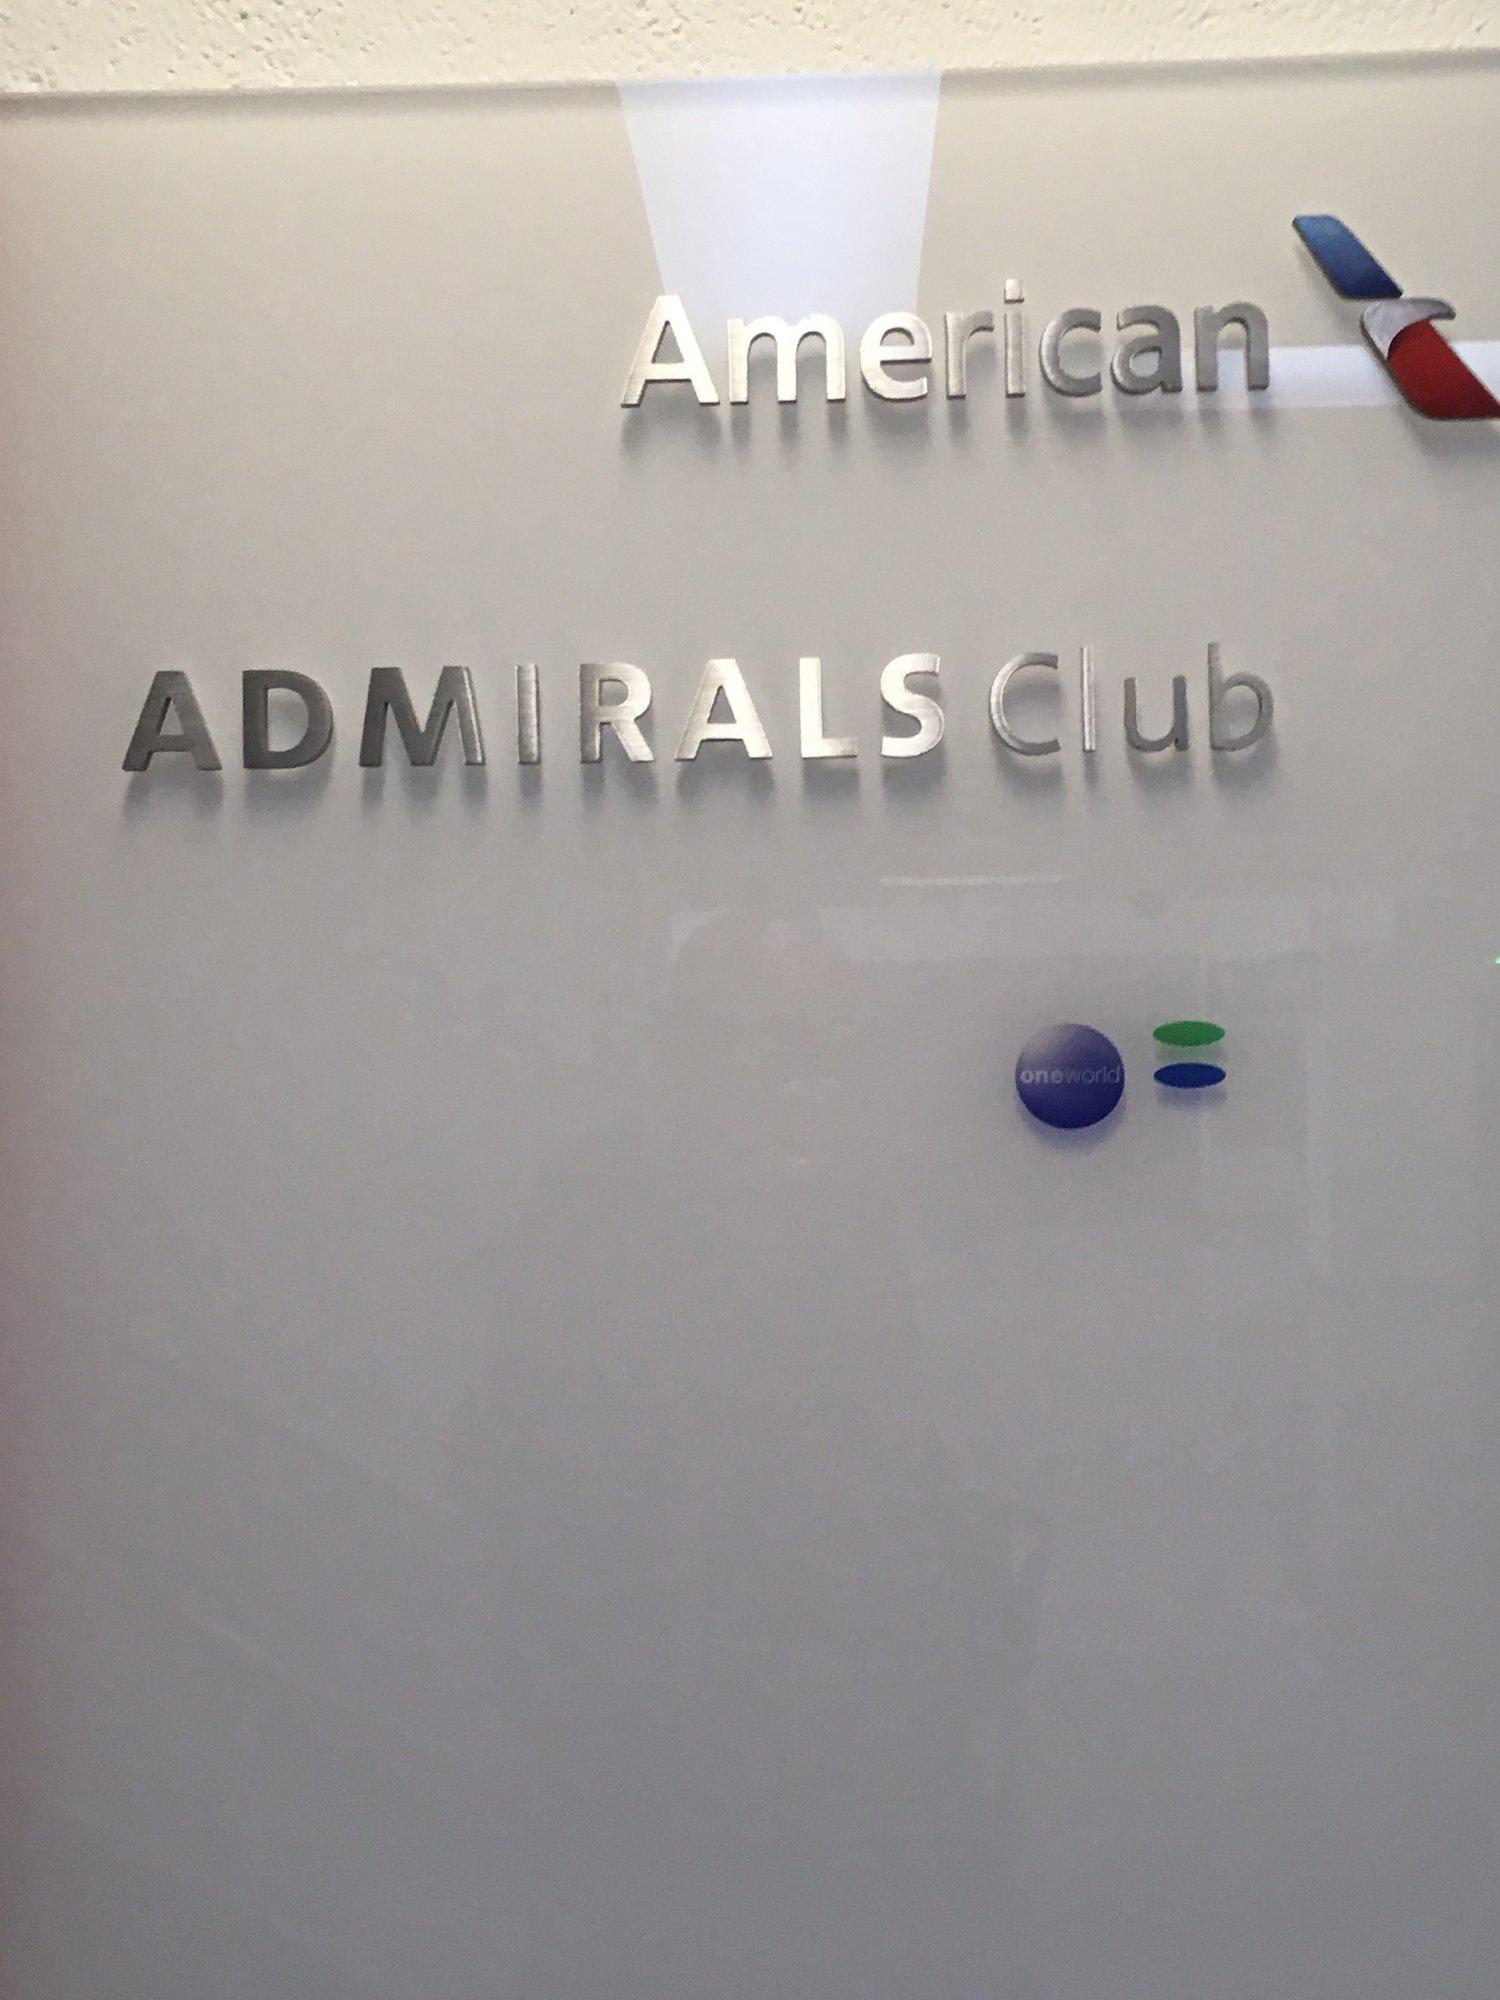 American Airlines Admirals Club image 31 of 32